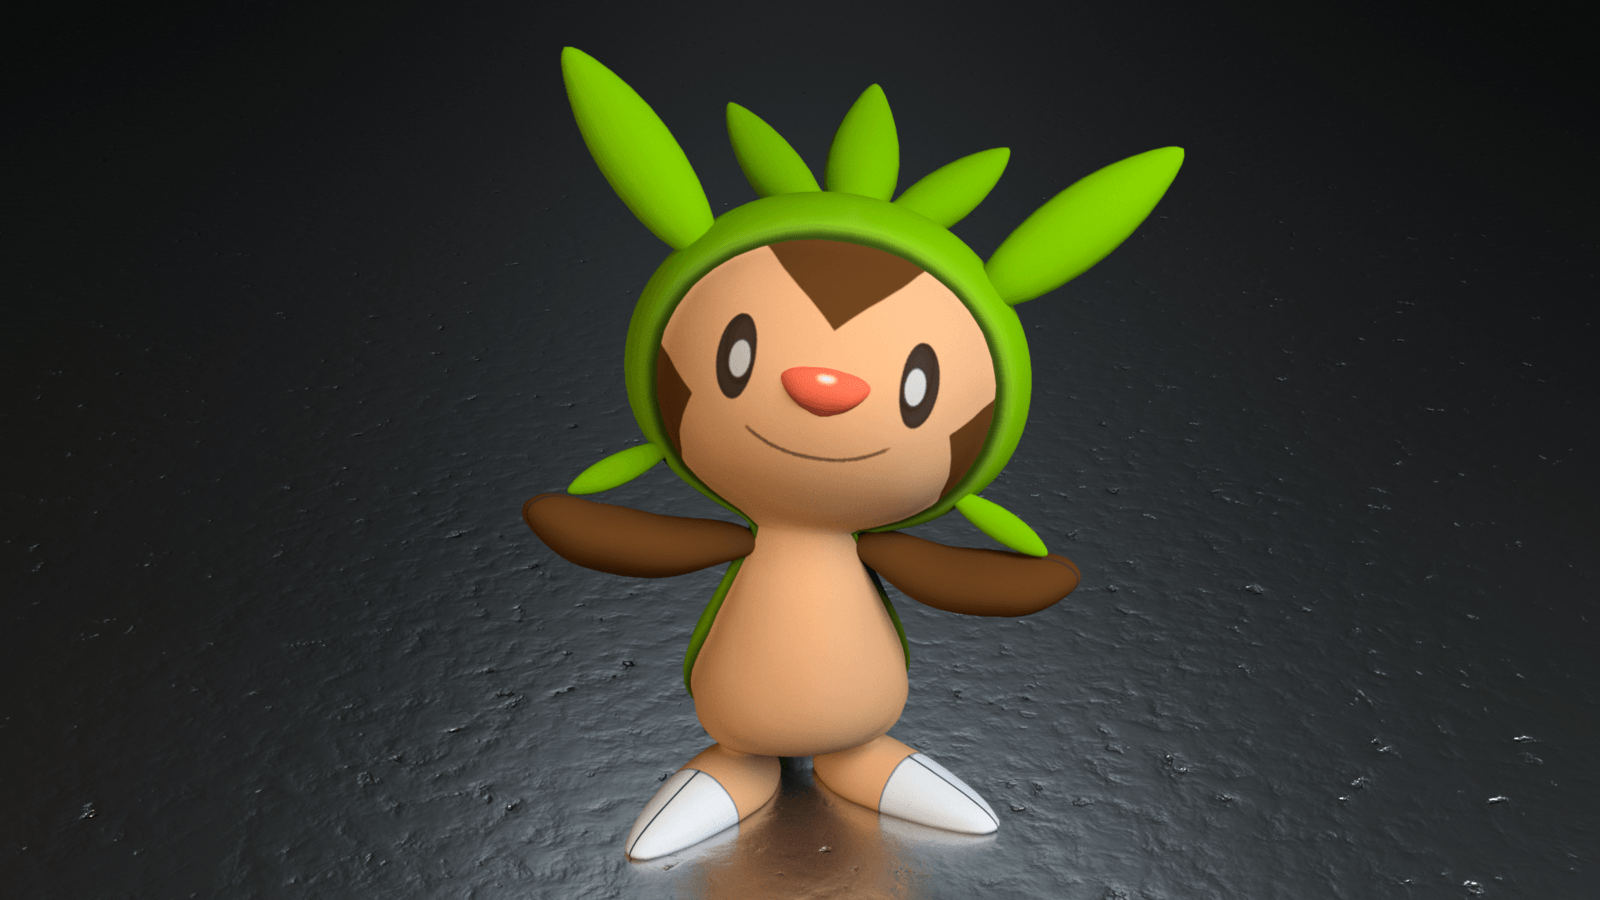 650. Chespin